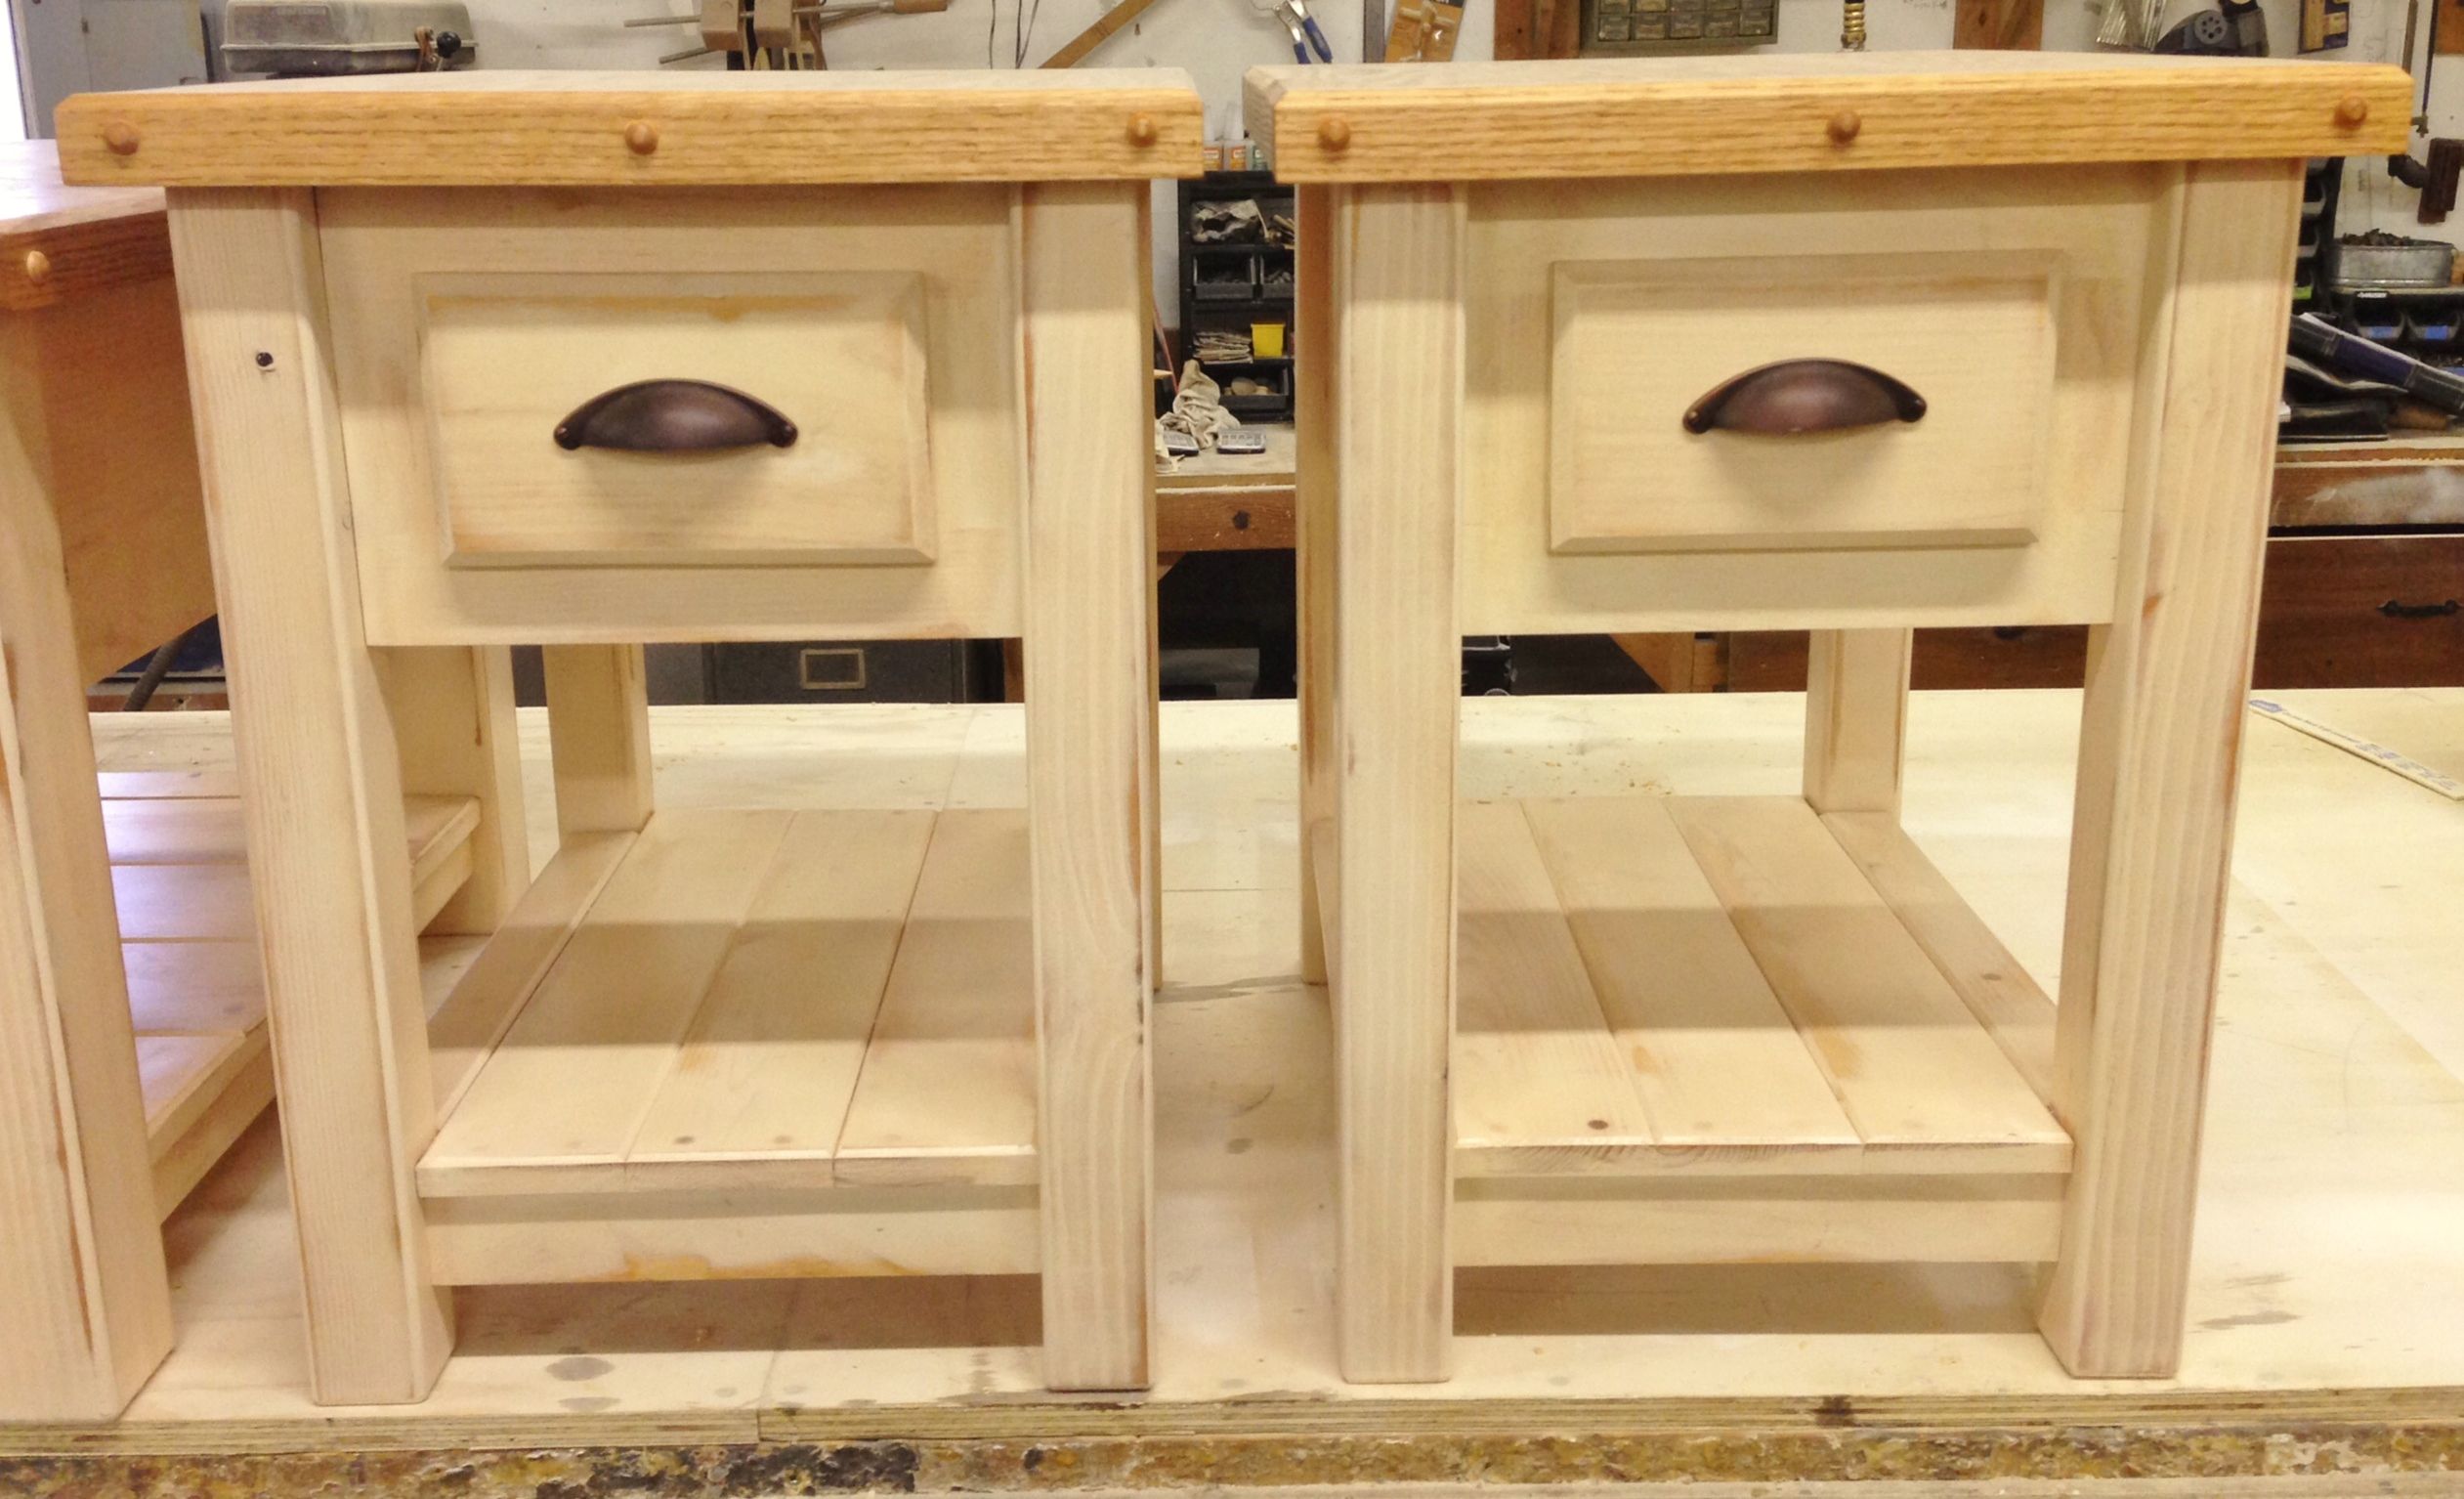 rustic end tables roumd